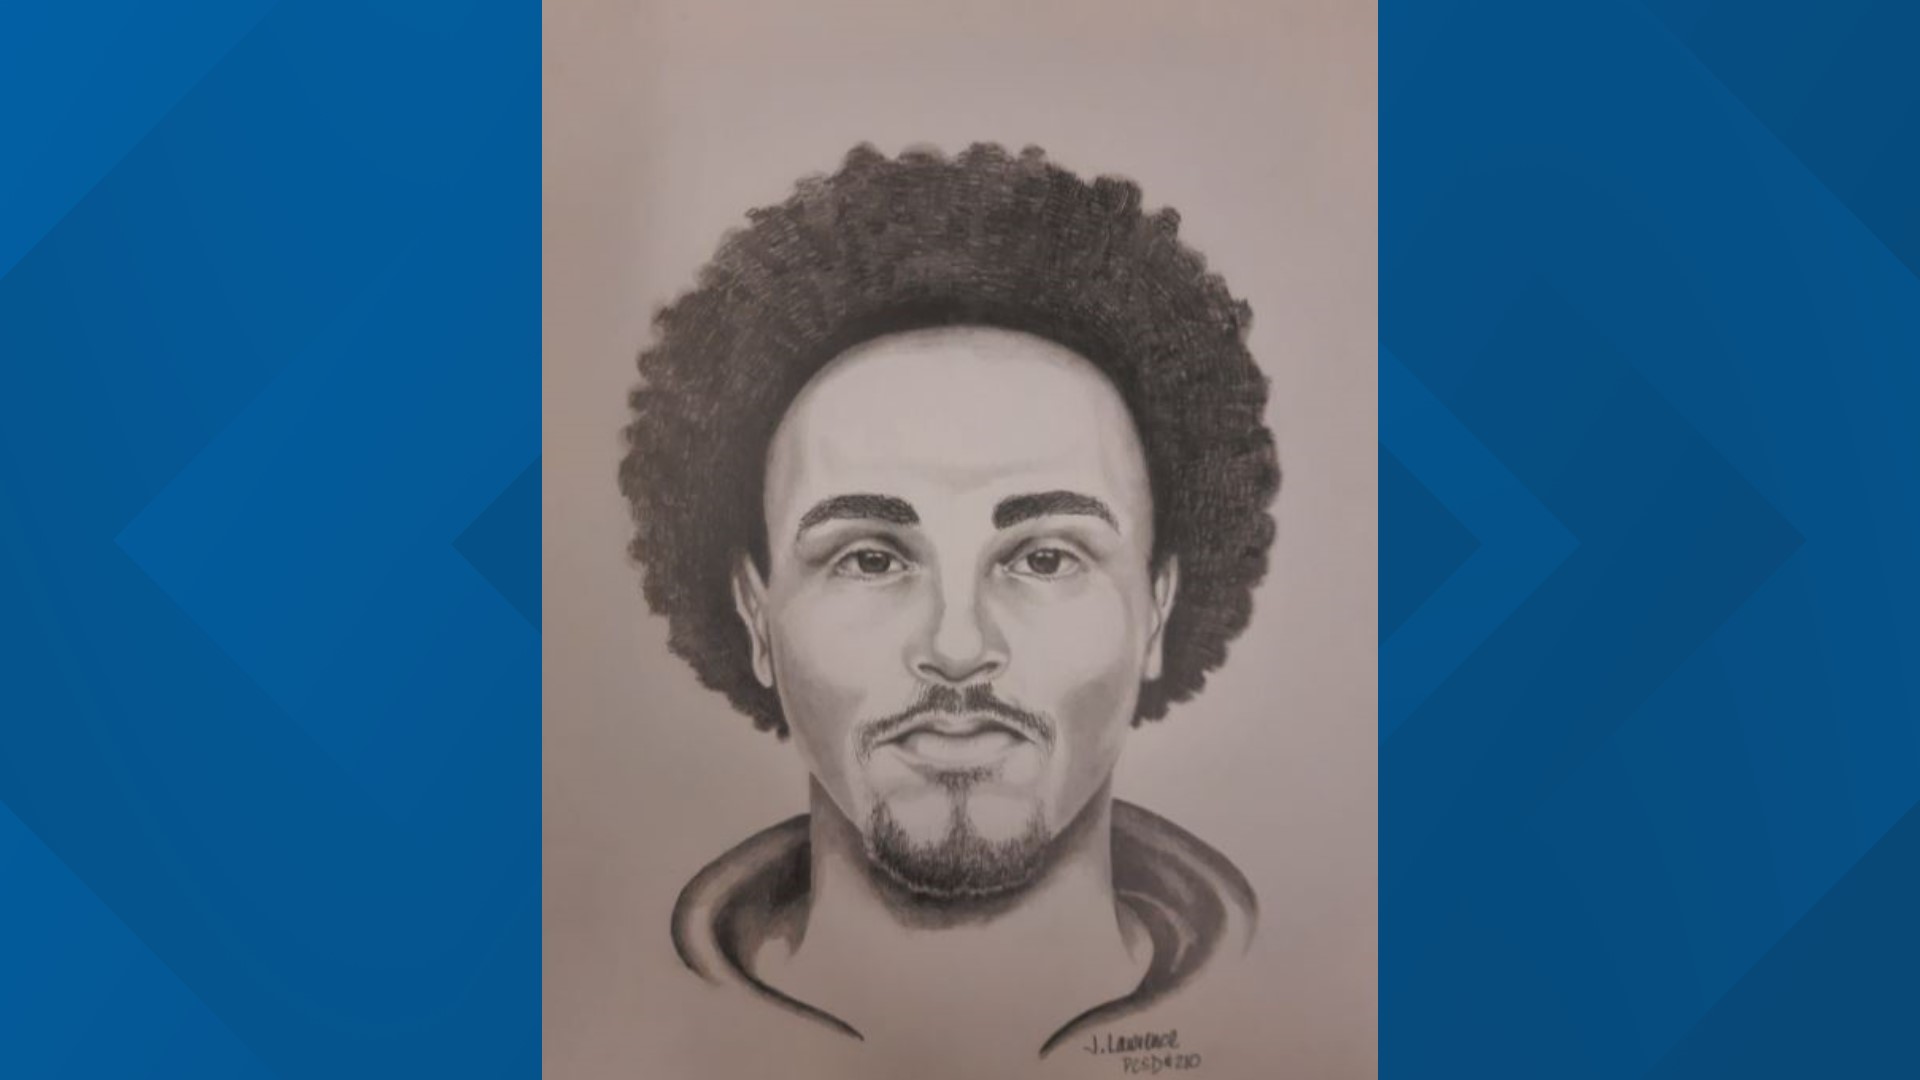 Police said a woman was walking on the Spine Trail at about 1 p.m. on Feb. 10 when the suspect pinned the woman to the ground and repeatedly stabbed her.